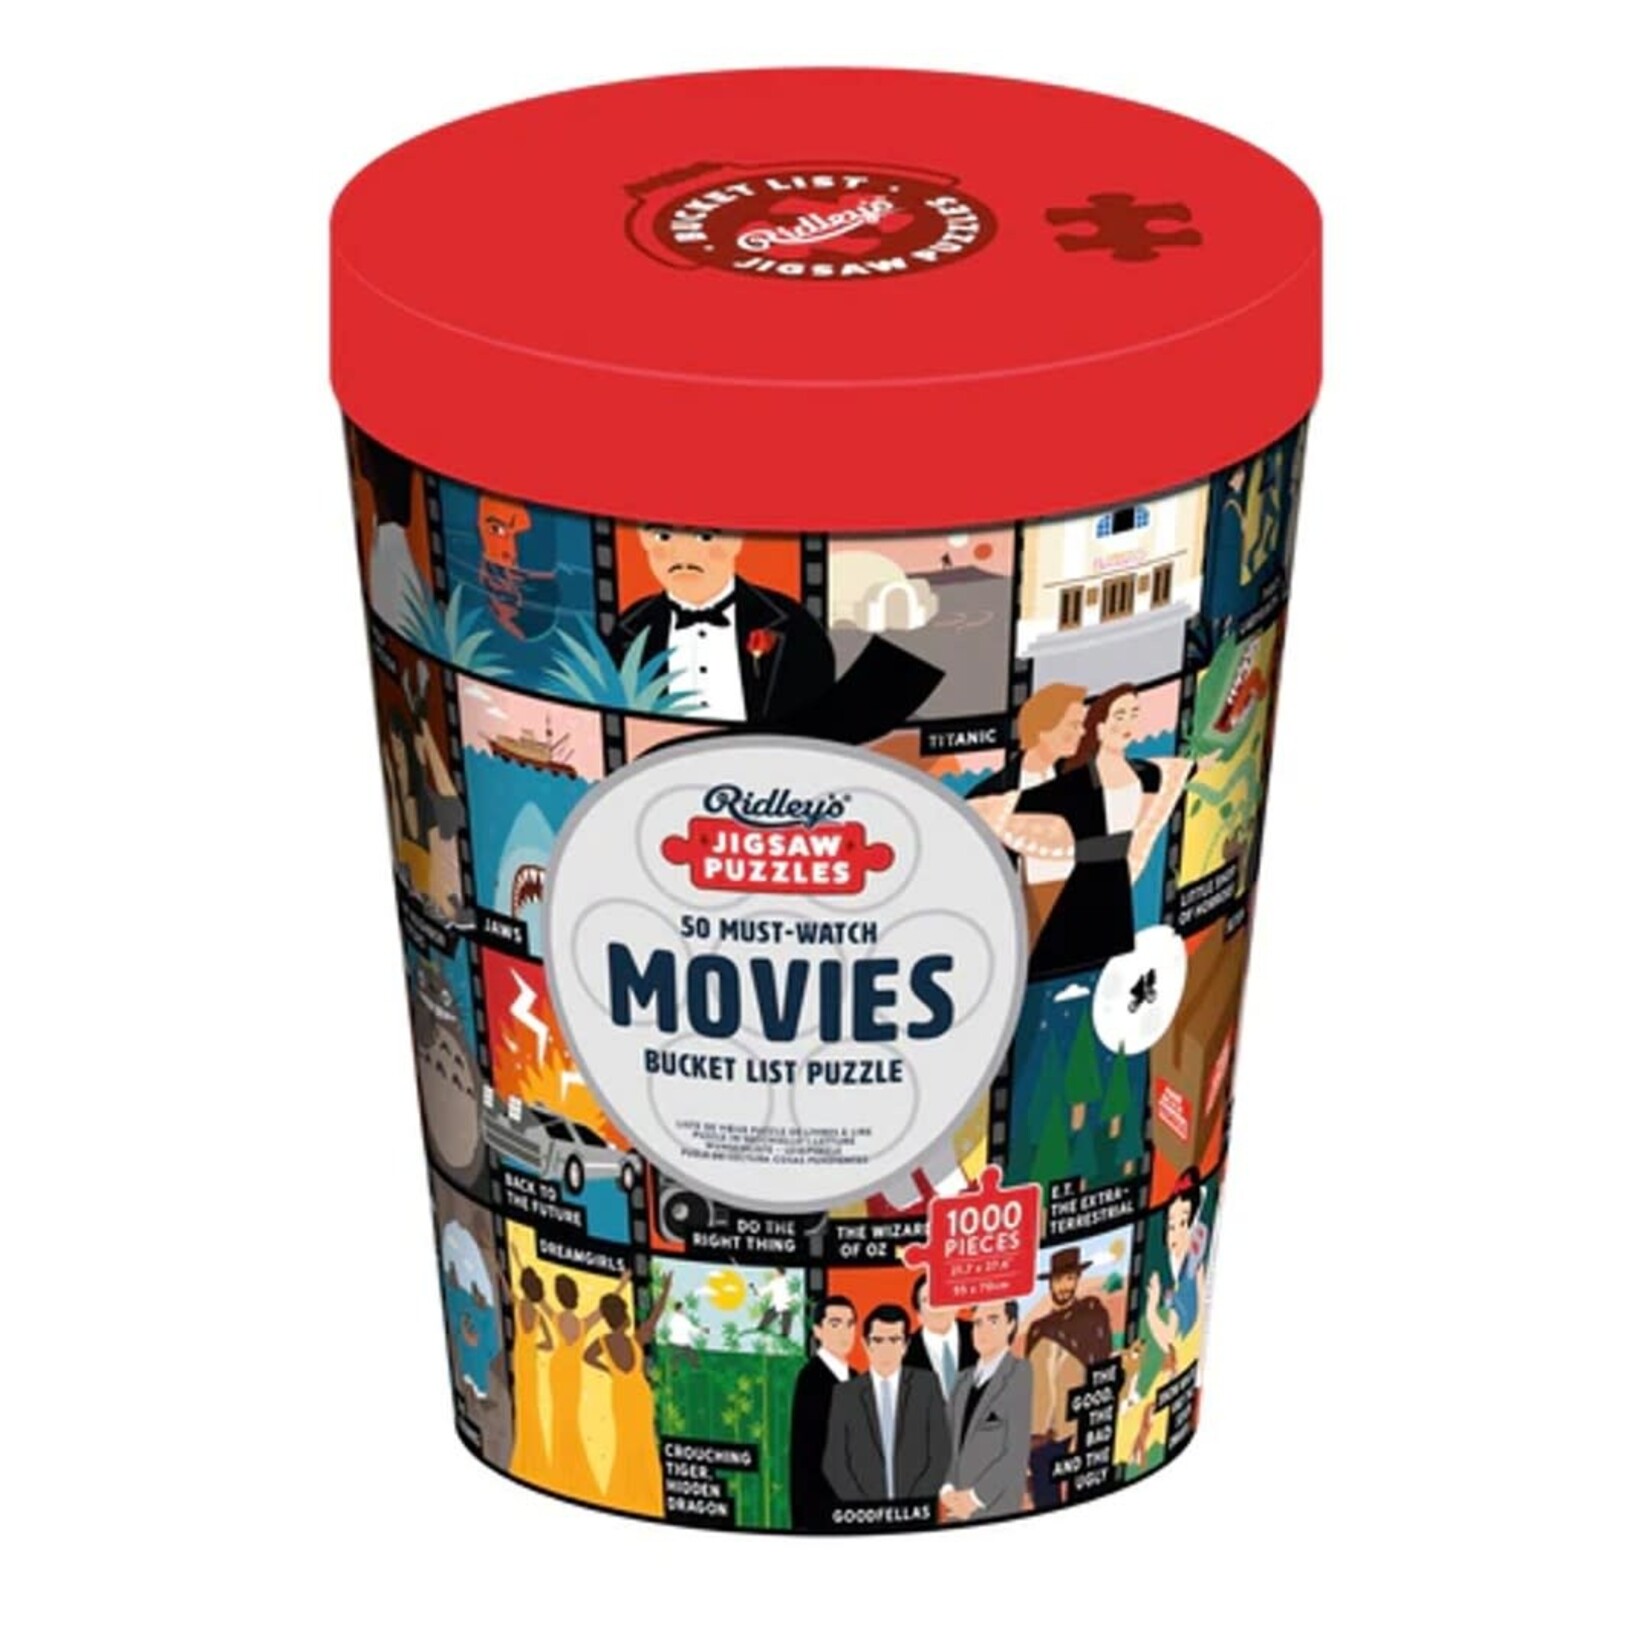 Ridley's Games 1000 pc Puzzle 50 Must-Watch Movies Bucket List